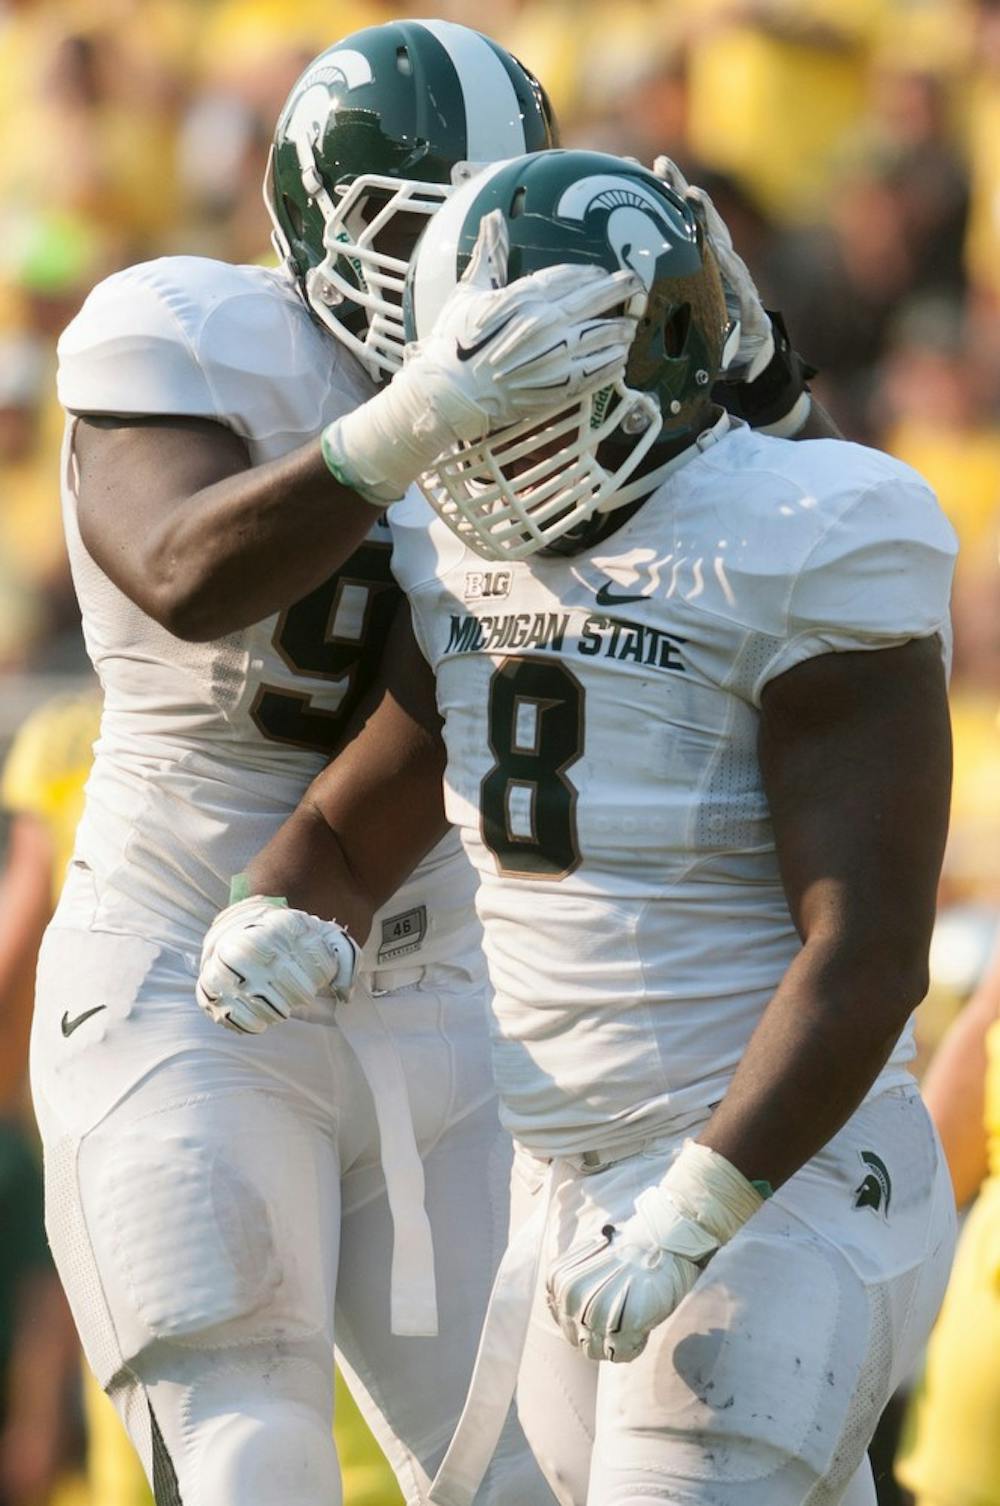 <p>Junior defensive linemen Joel Heath, left, and Lawrence Thomas celebrate a tackle Thomas made during the game against Oregon on Sept. 6, 2014, at Autzen Stadium in Eugene, Ore. Julia Nagy/The State News</p>